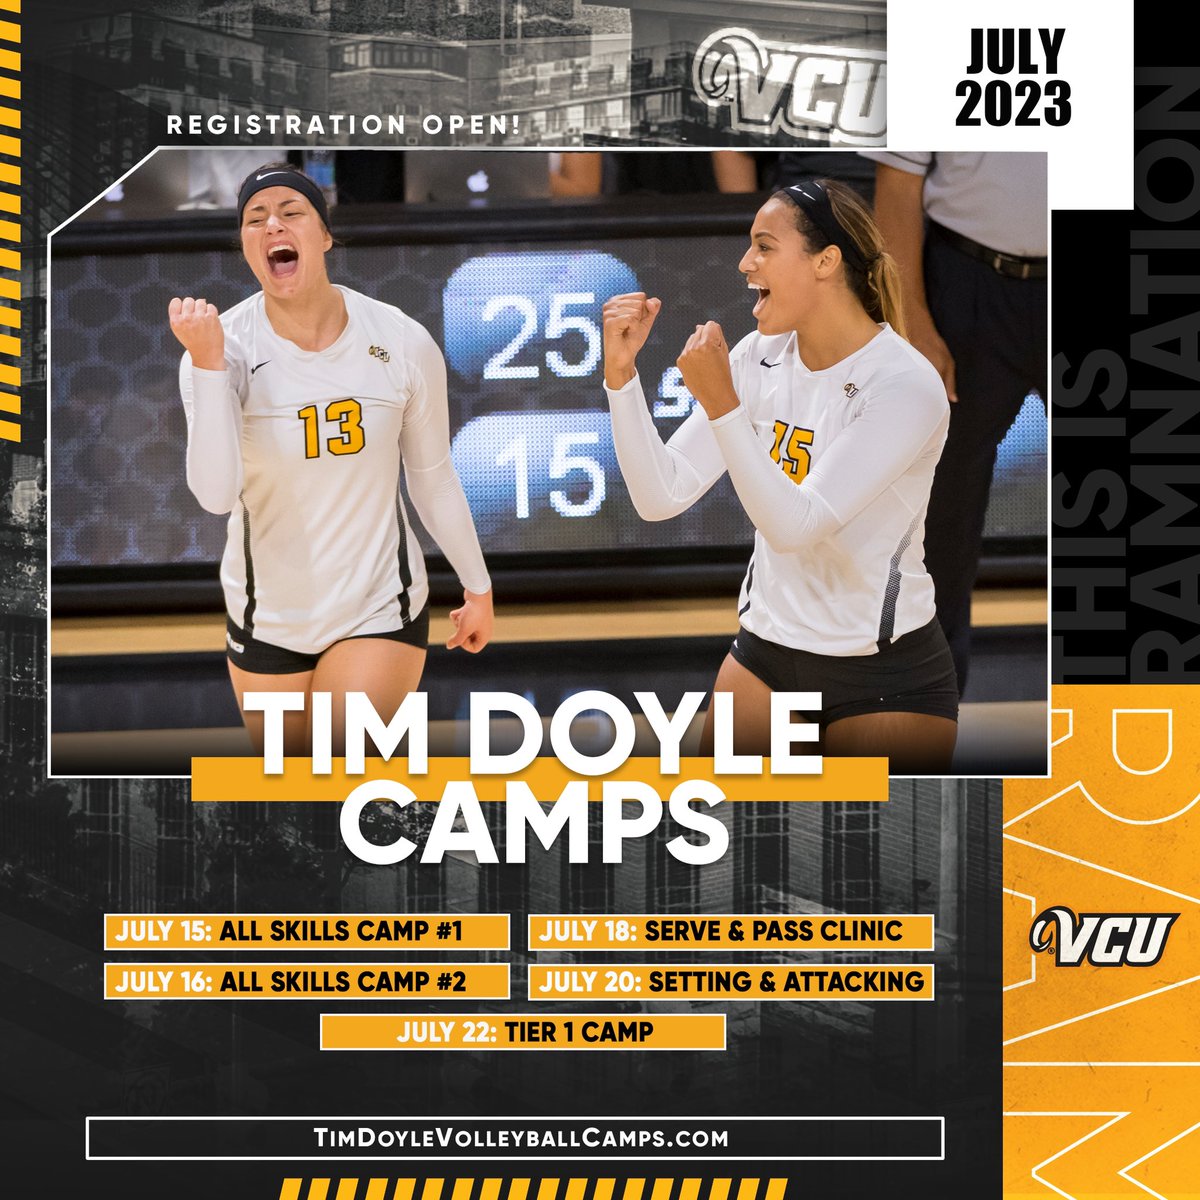 Summer is almost here! Don't miss the opportunity to join us at our CAMPS!! Sign up today!

To register, visit the link: timdoylevolleyballcamps.com 

#ThisIsRamNation #LetsGoVCU